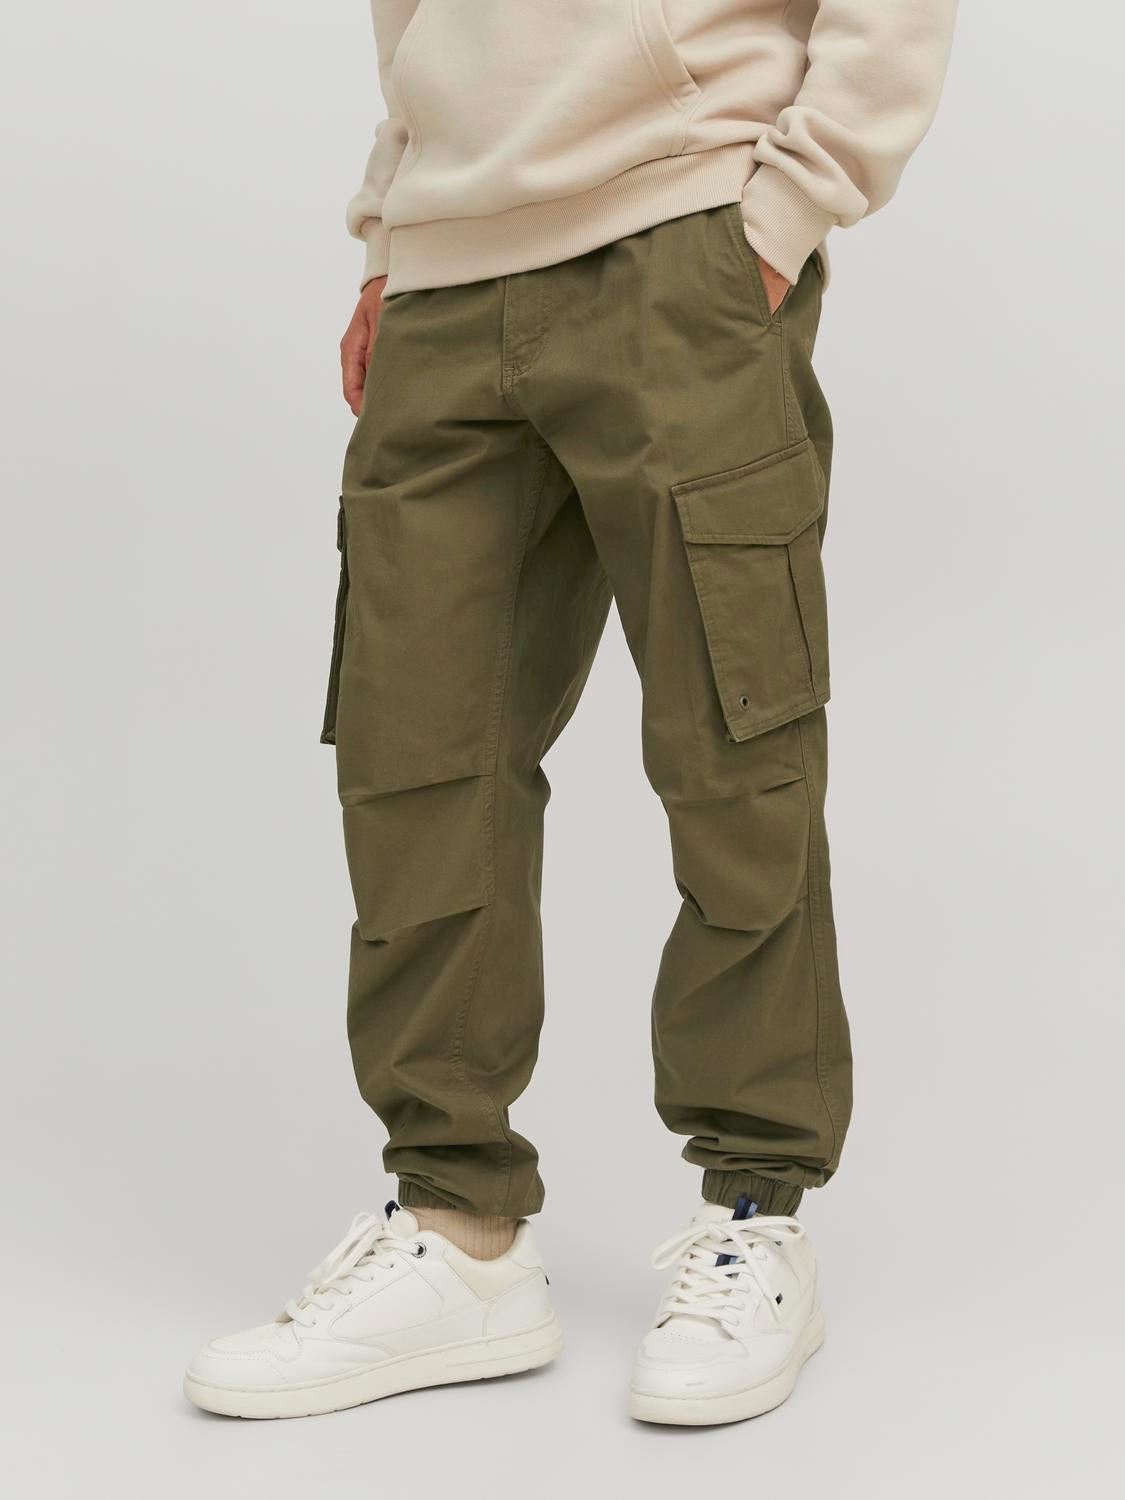 Buy Cargo Pants For Men At Lowest Prices Online In India | Tata CLiQ